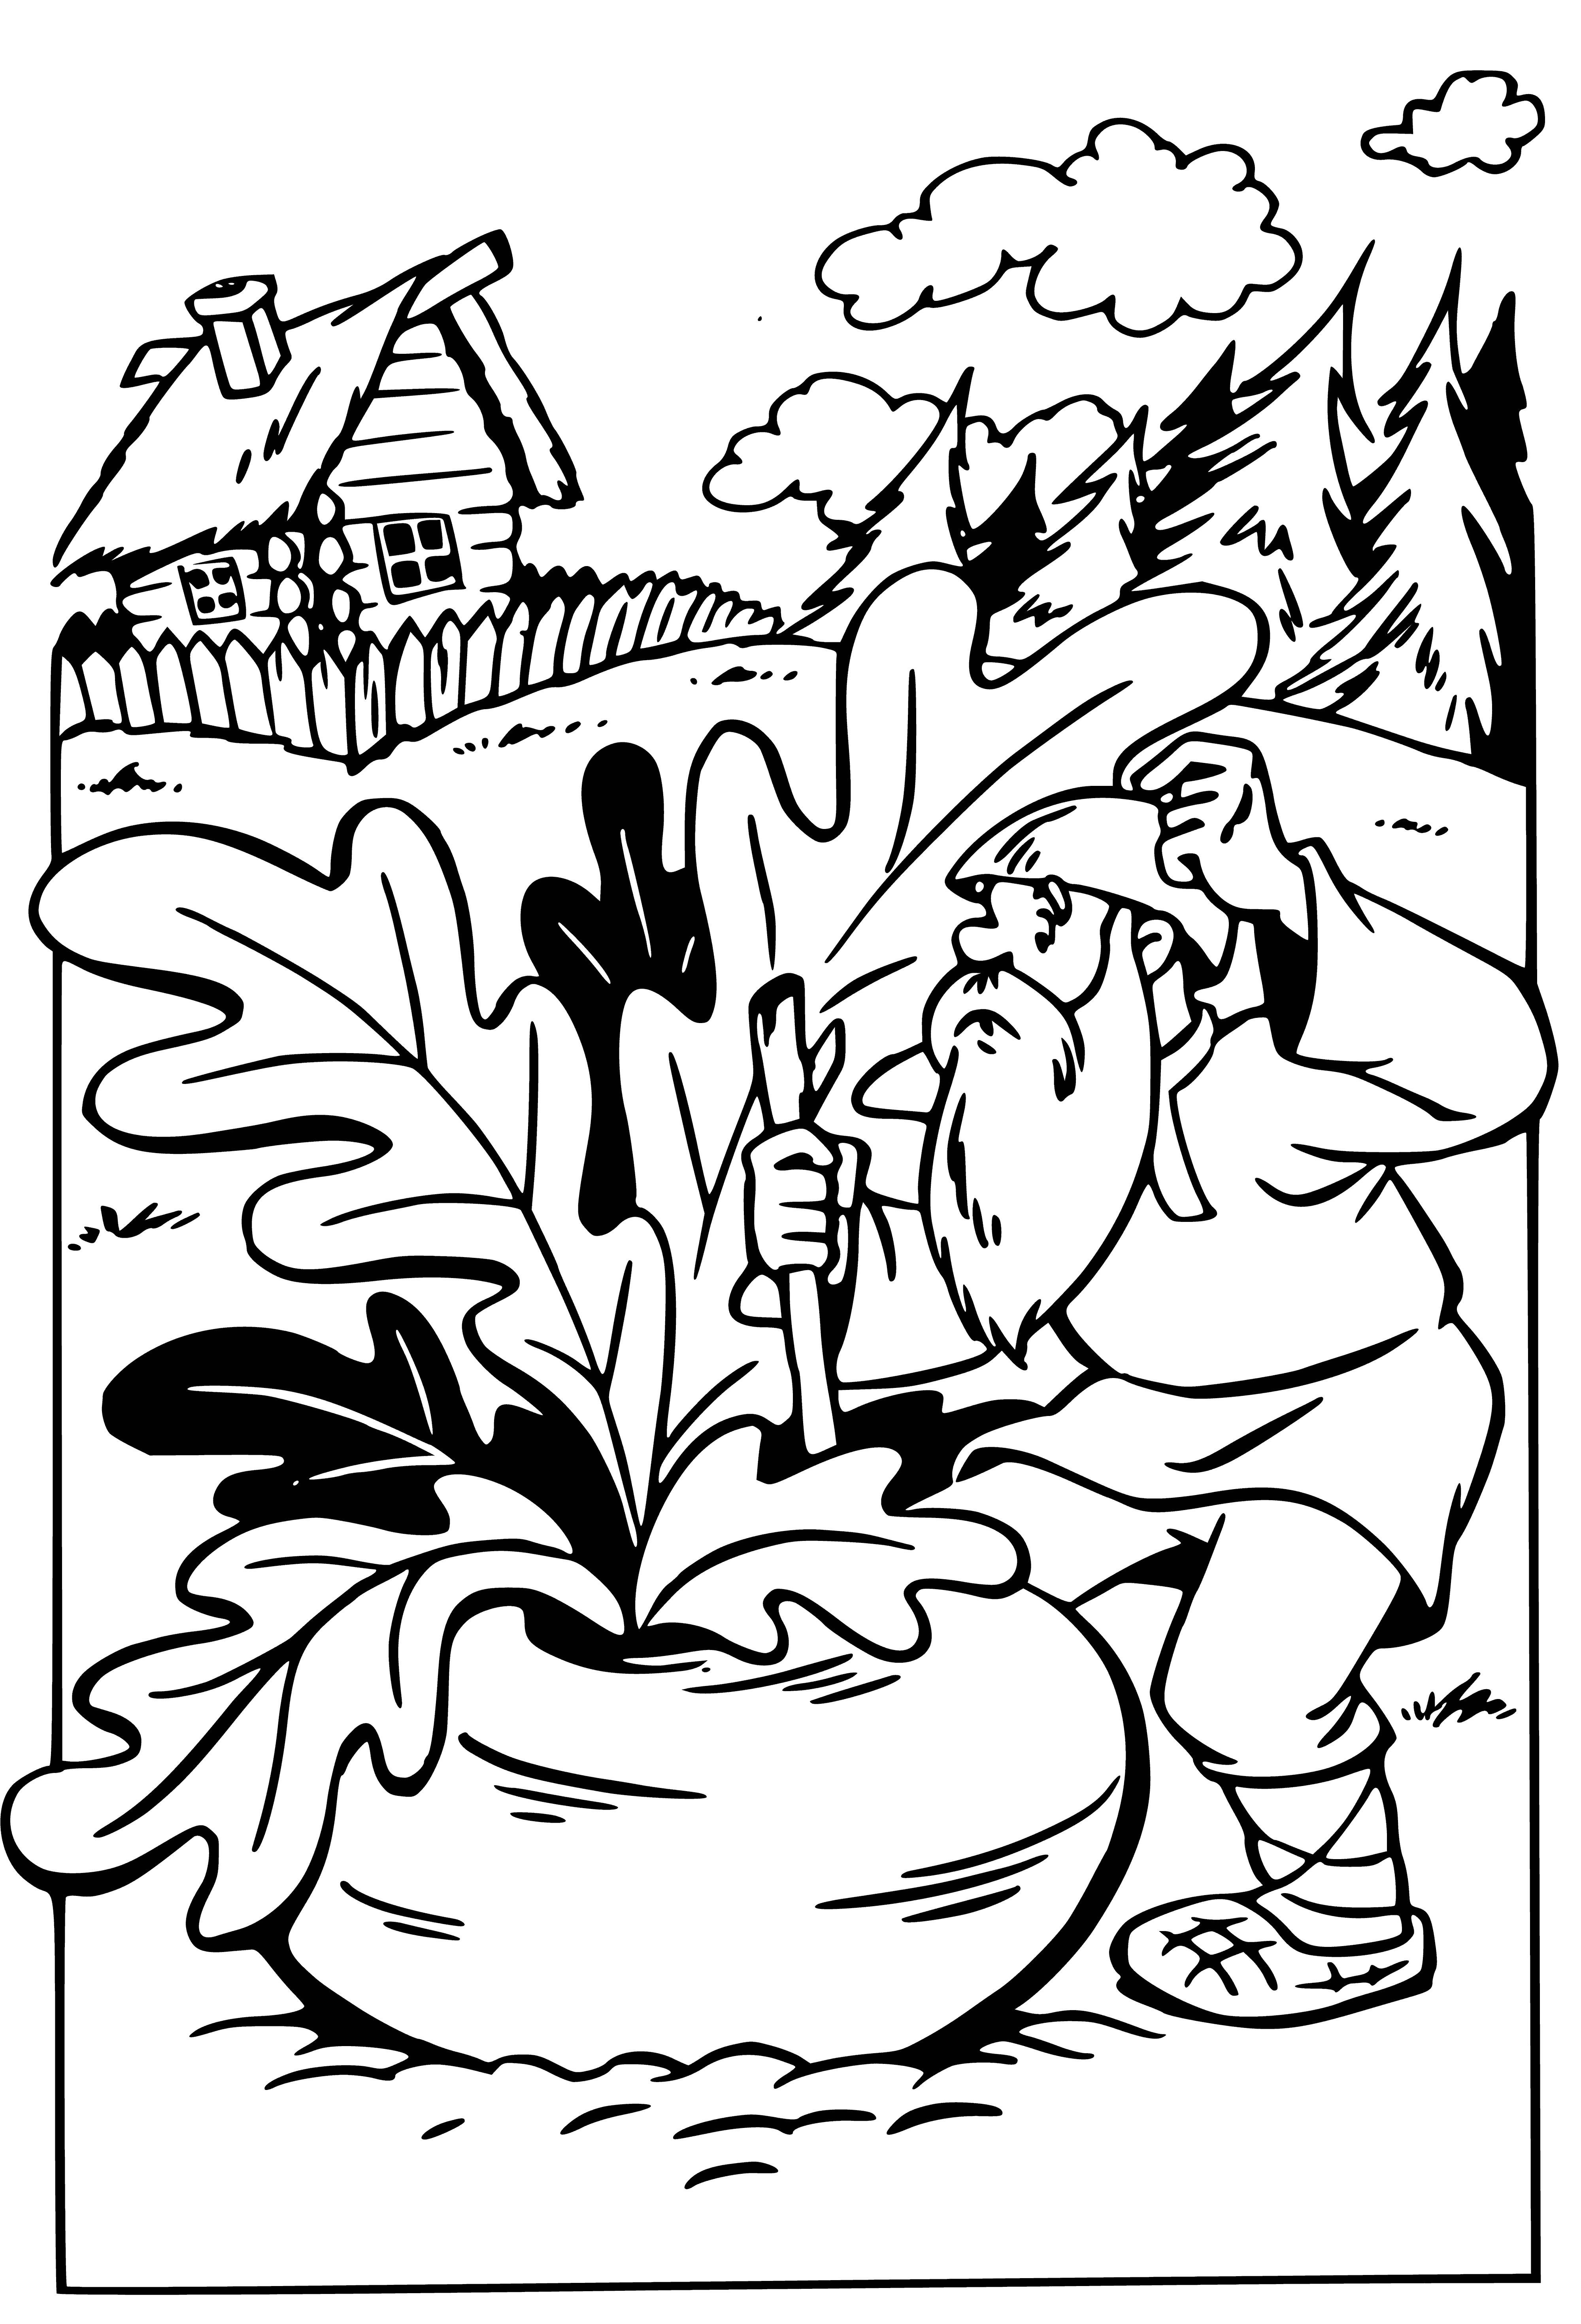 coloring page: Two people on either side of a large turnip, surprised that it grew so big!